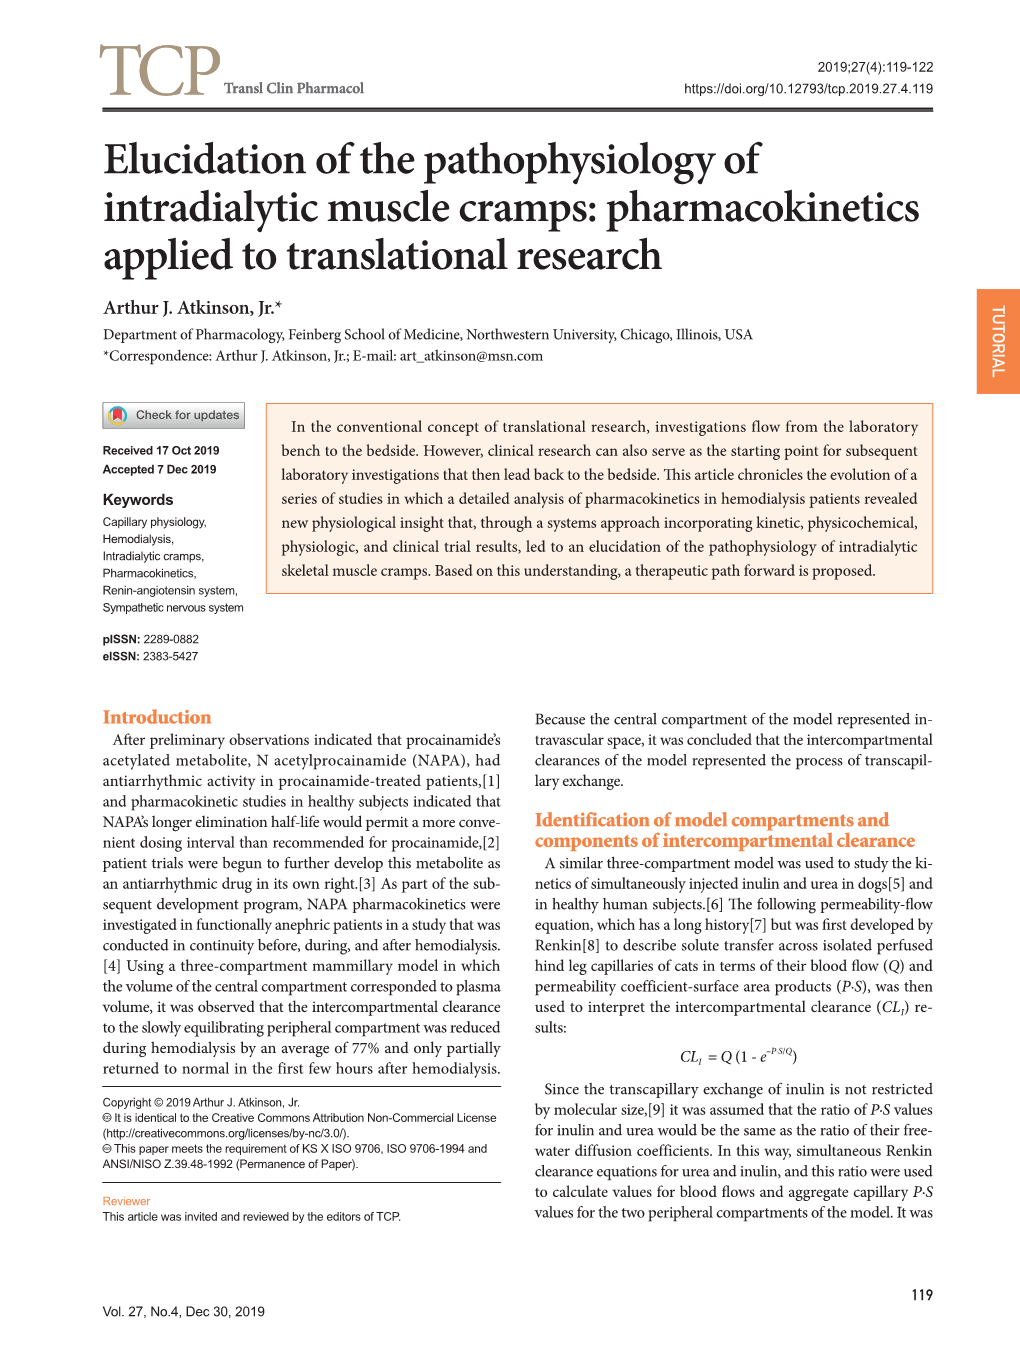 Elucidation of the Pathophysiology of Intradialytic Muscle Cramps: Pharmacokinetics Applied to Translational Research